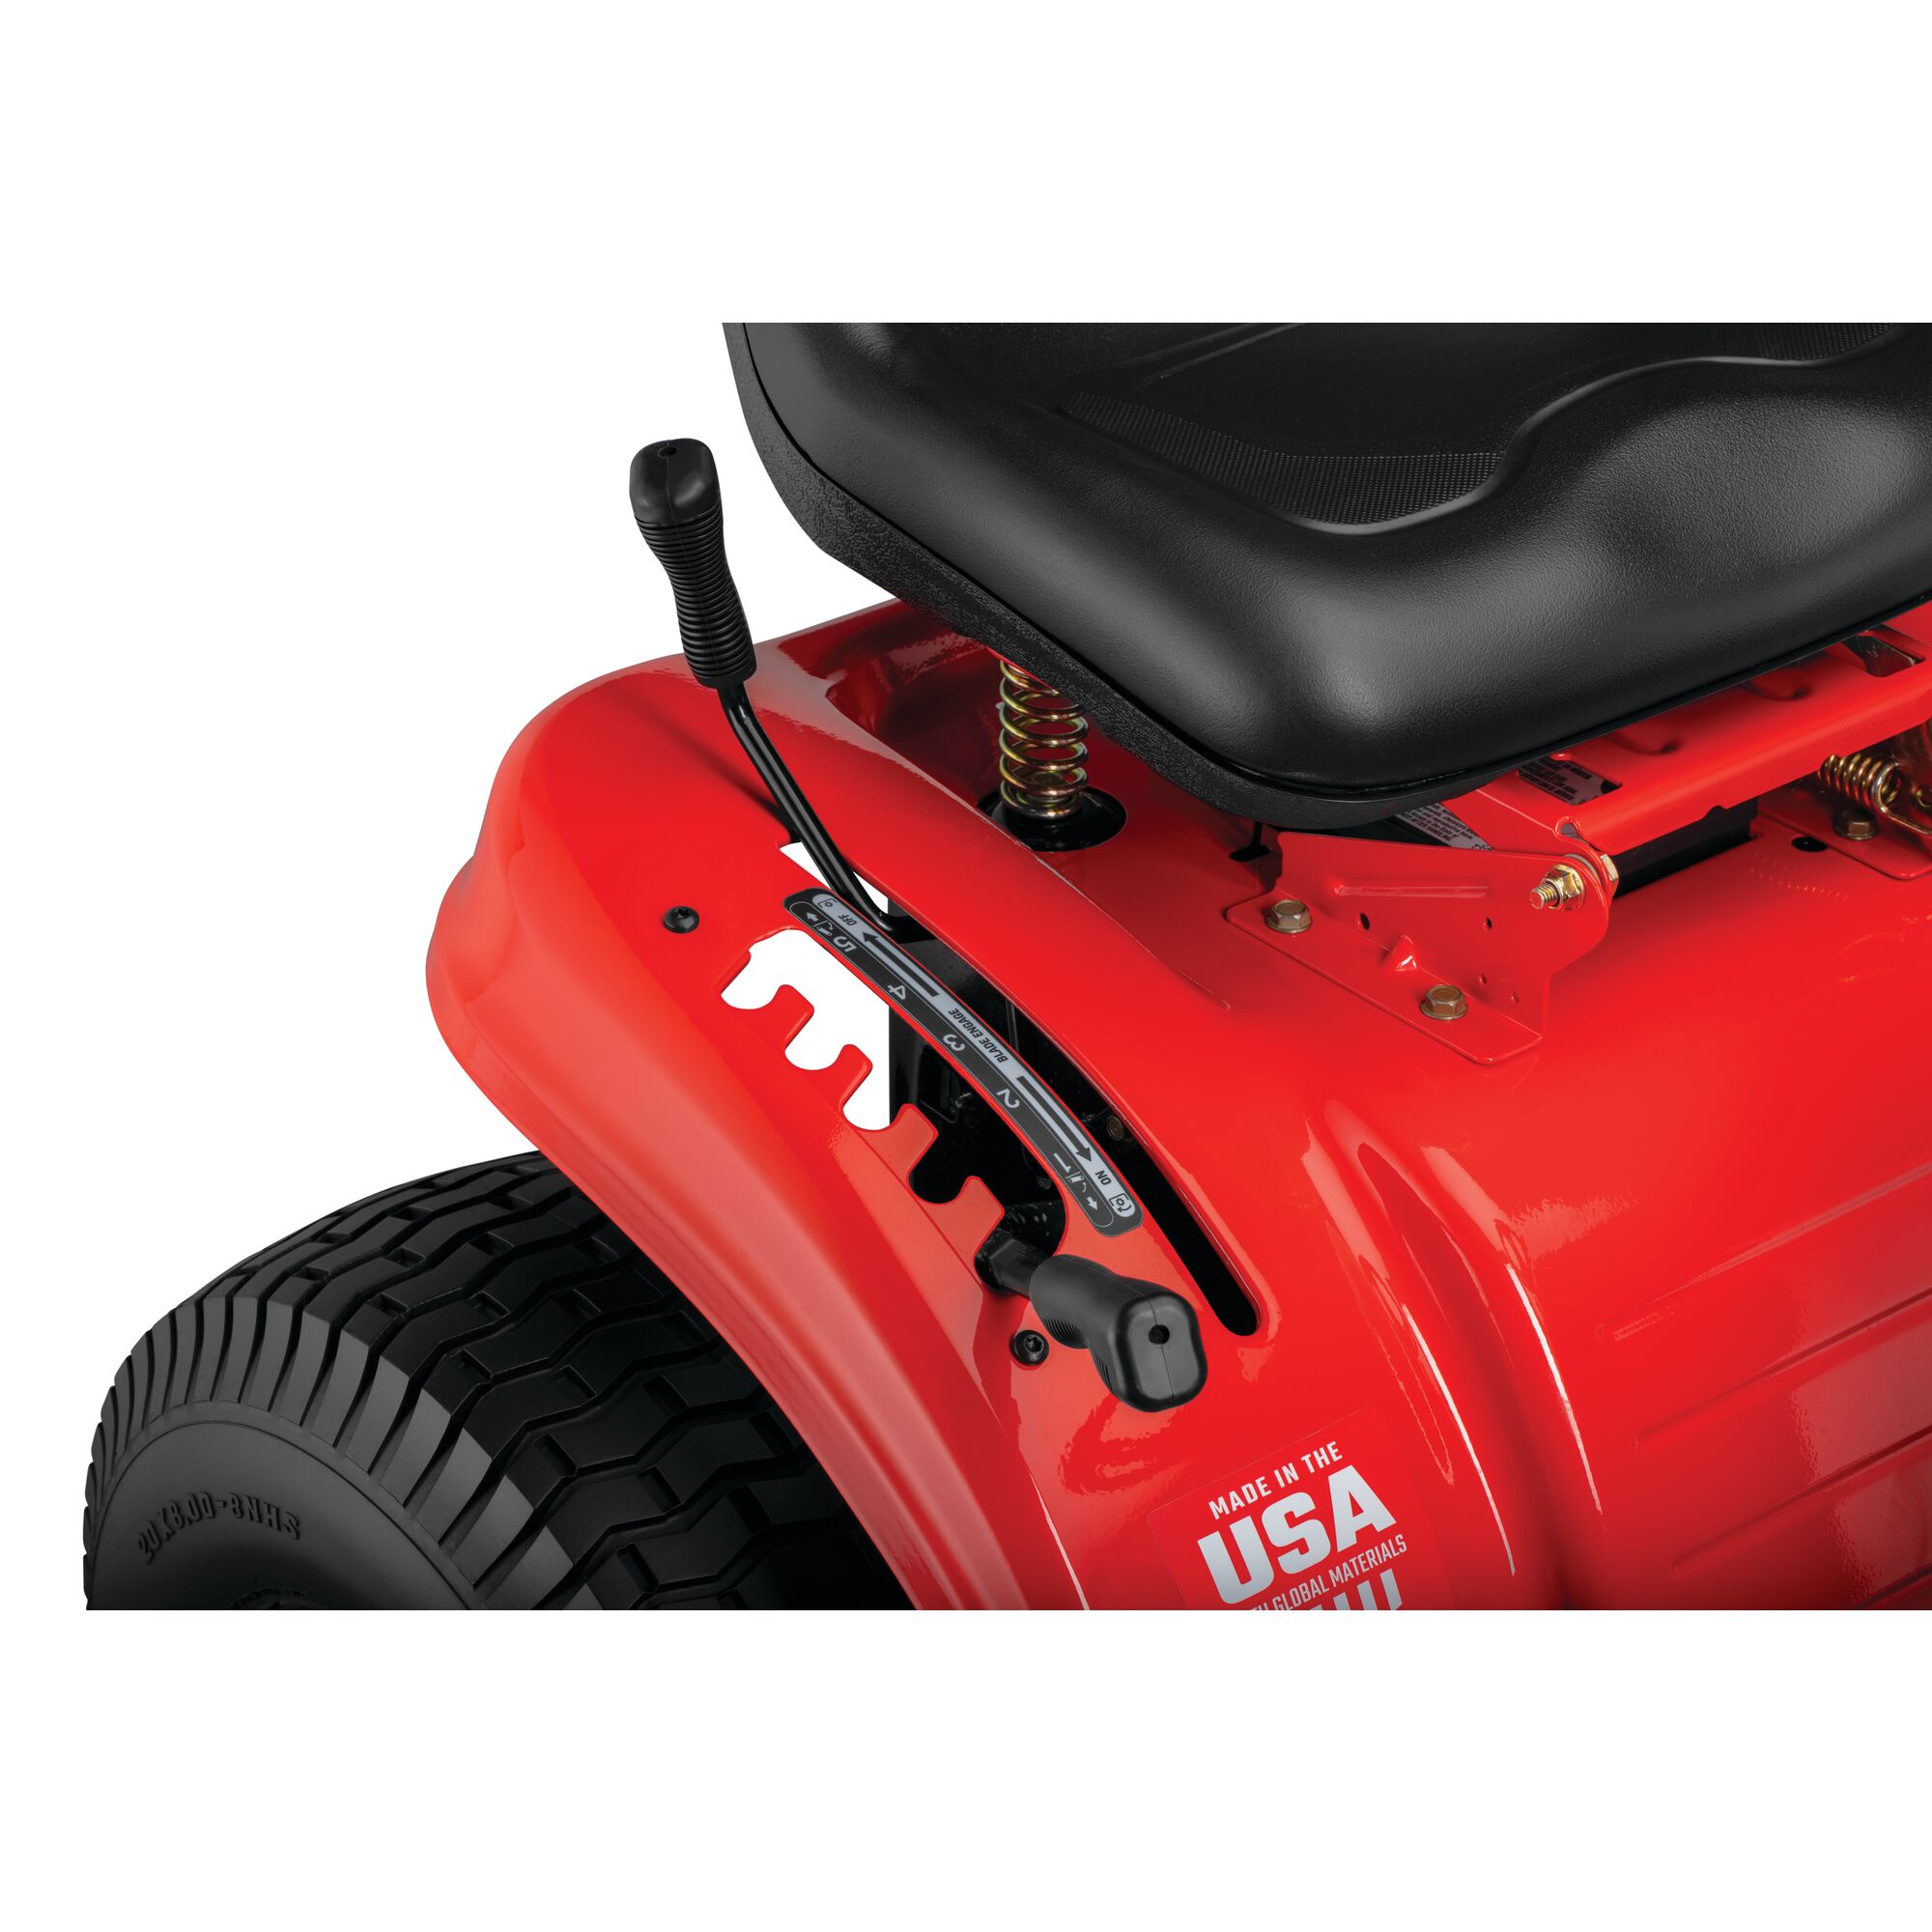 Gear feature of a 46 inch 19 h p hydrostatic riding mower.